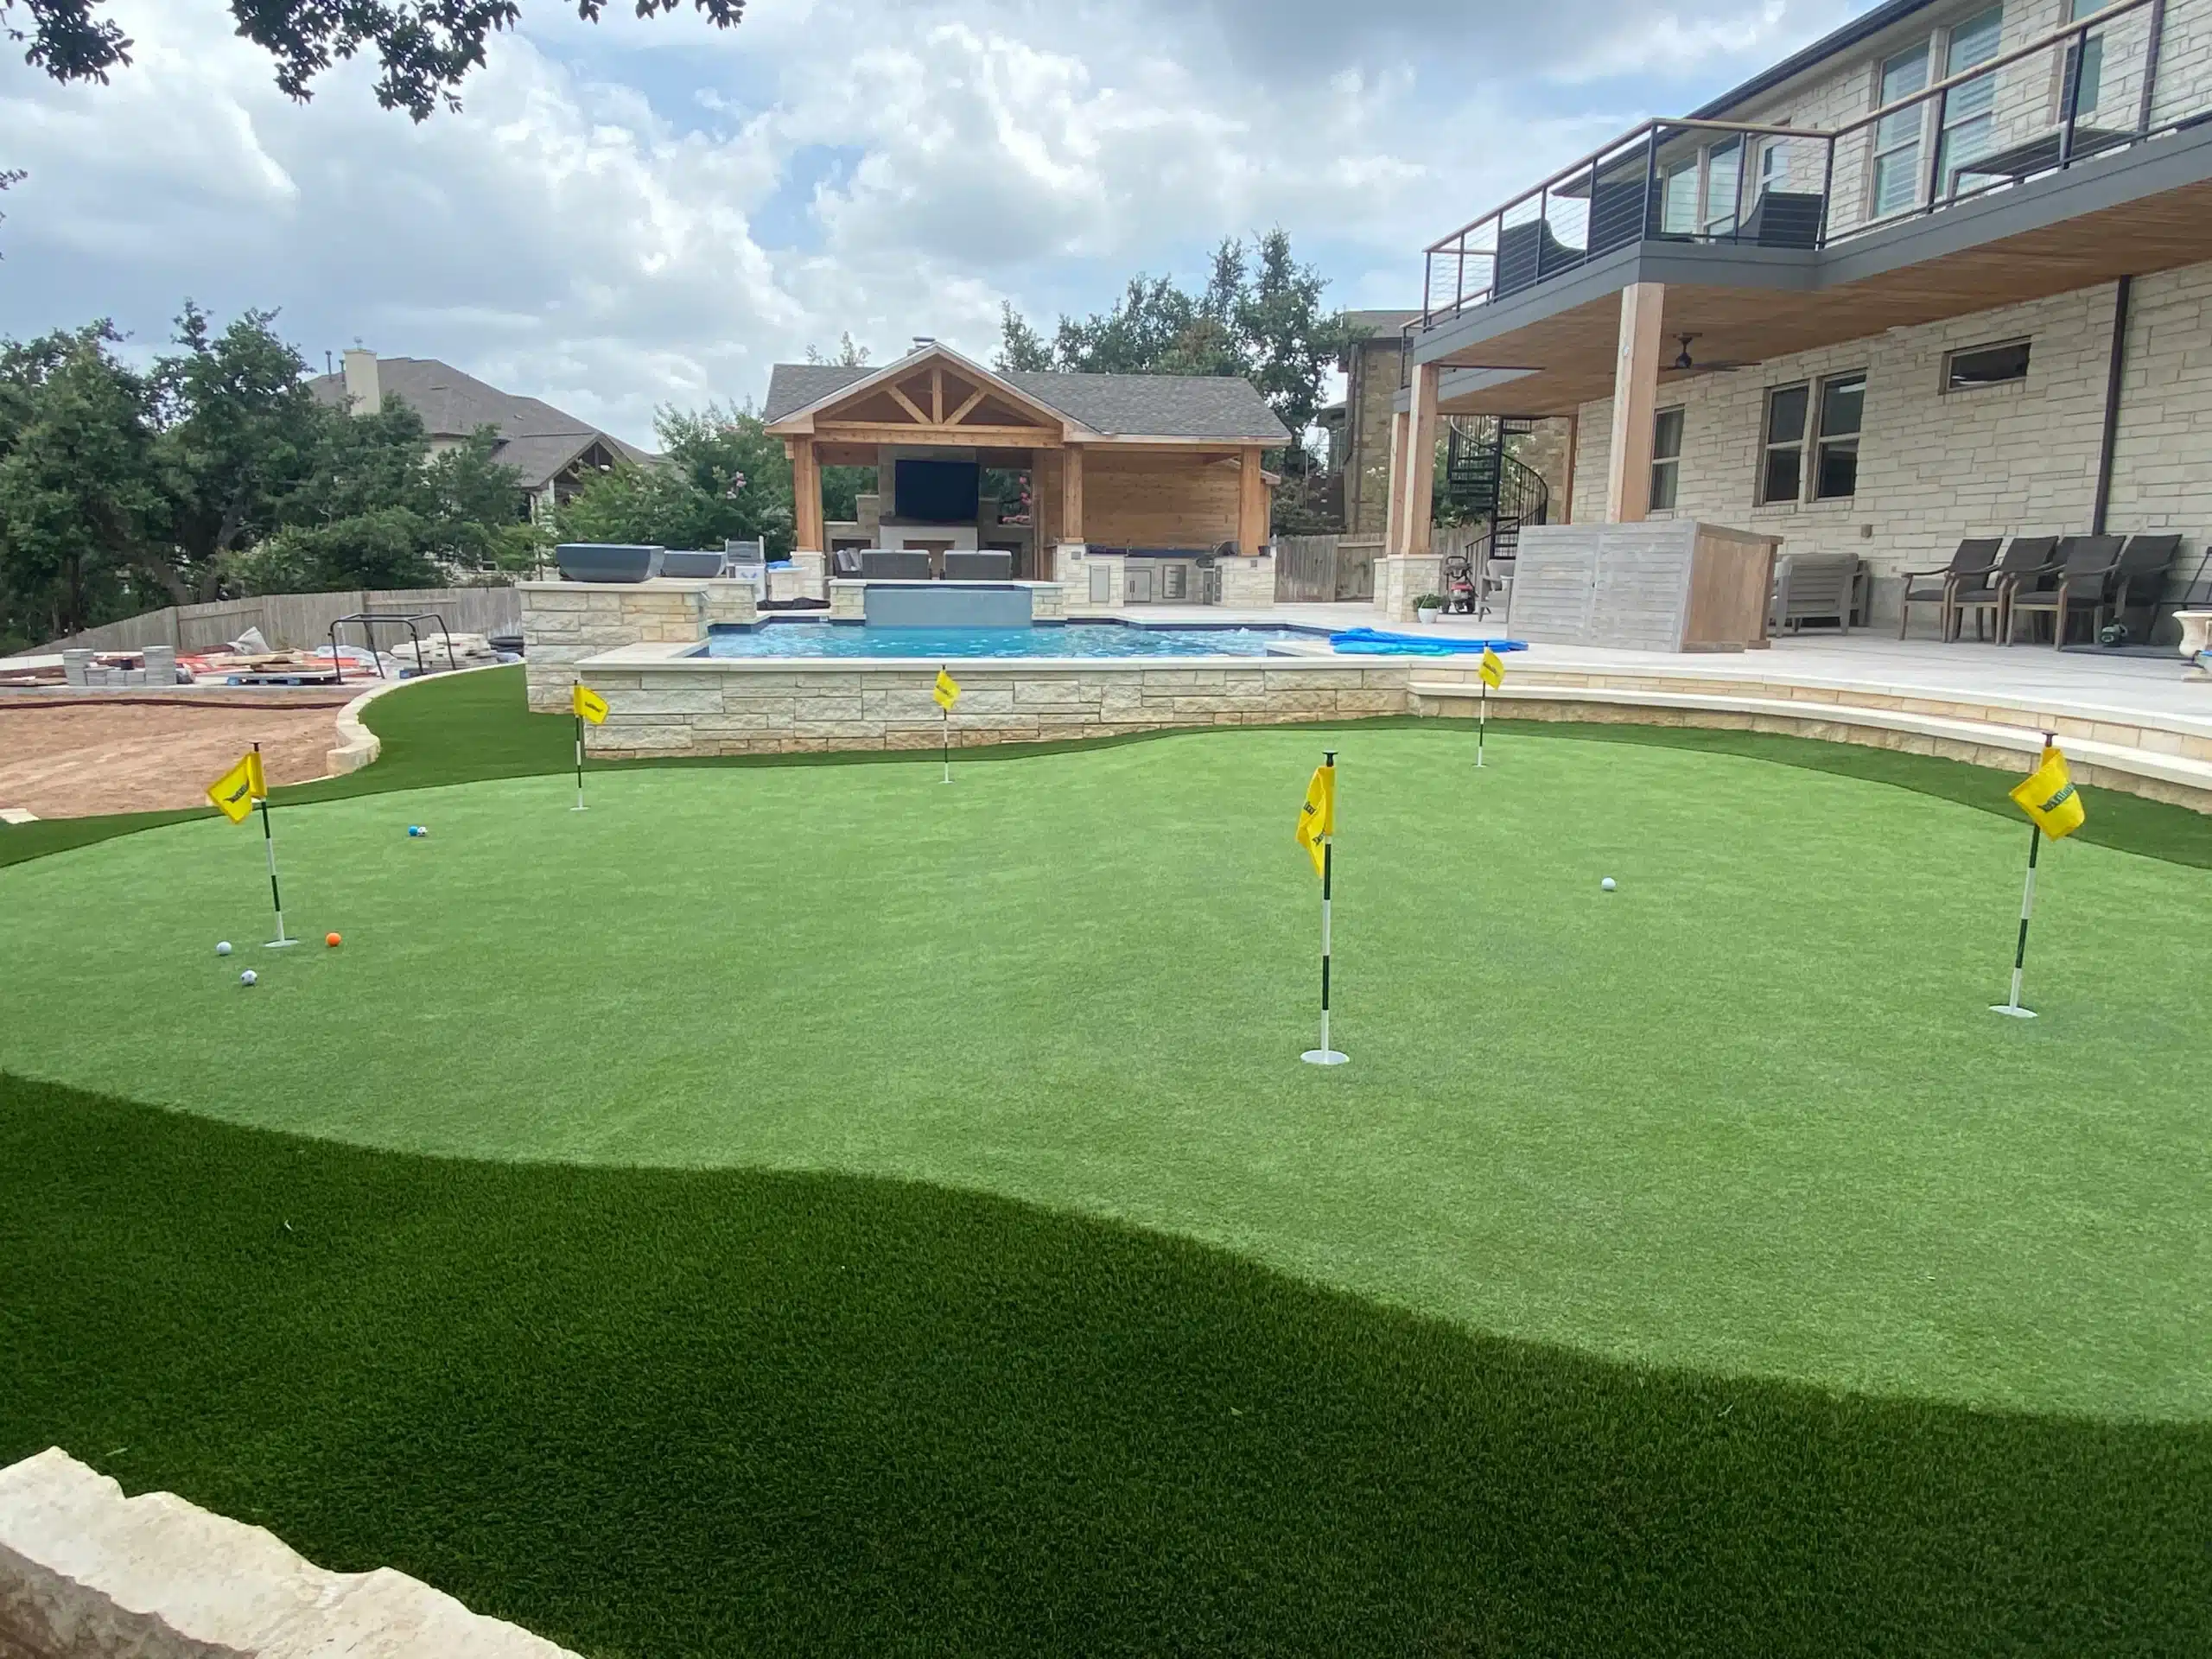 mini golf course next to in-ground pool in the backyard of two story home outfitted with small pool house